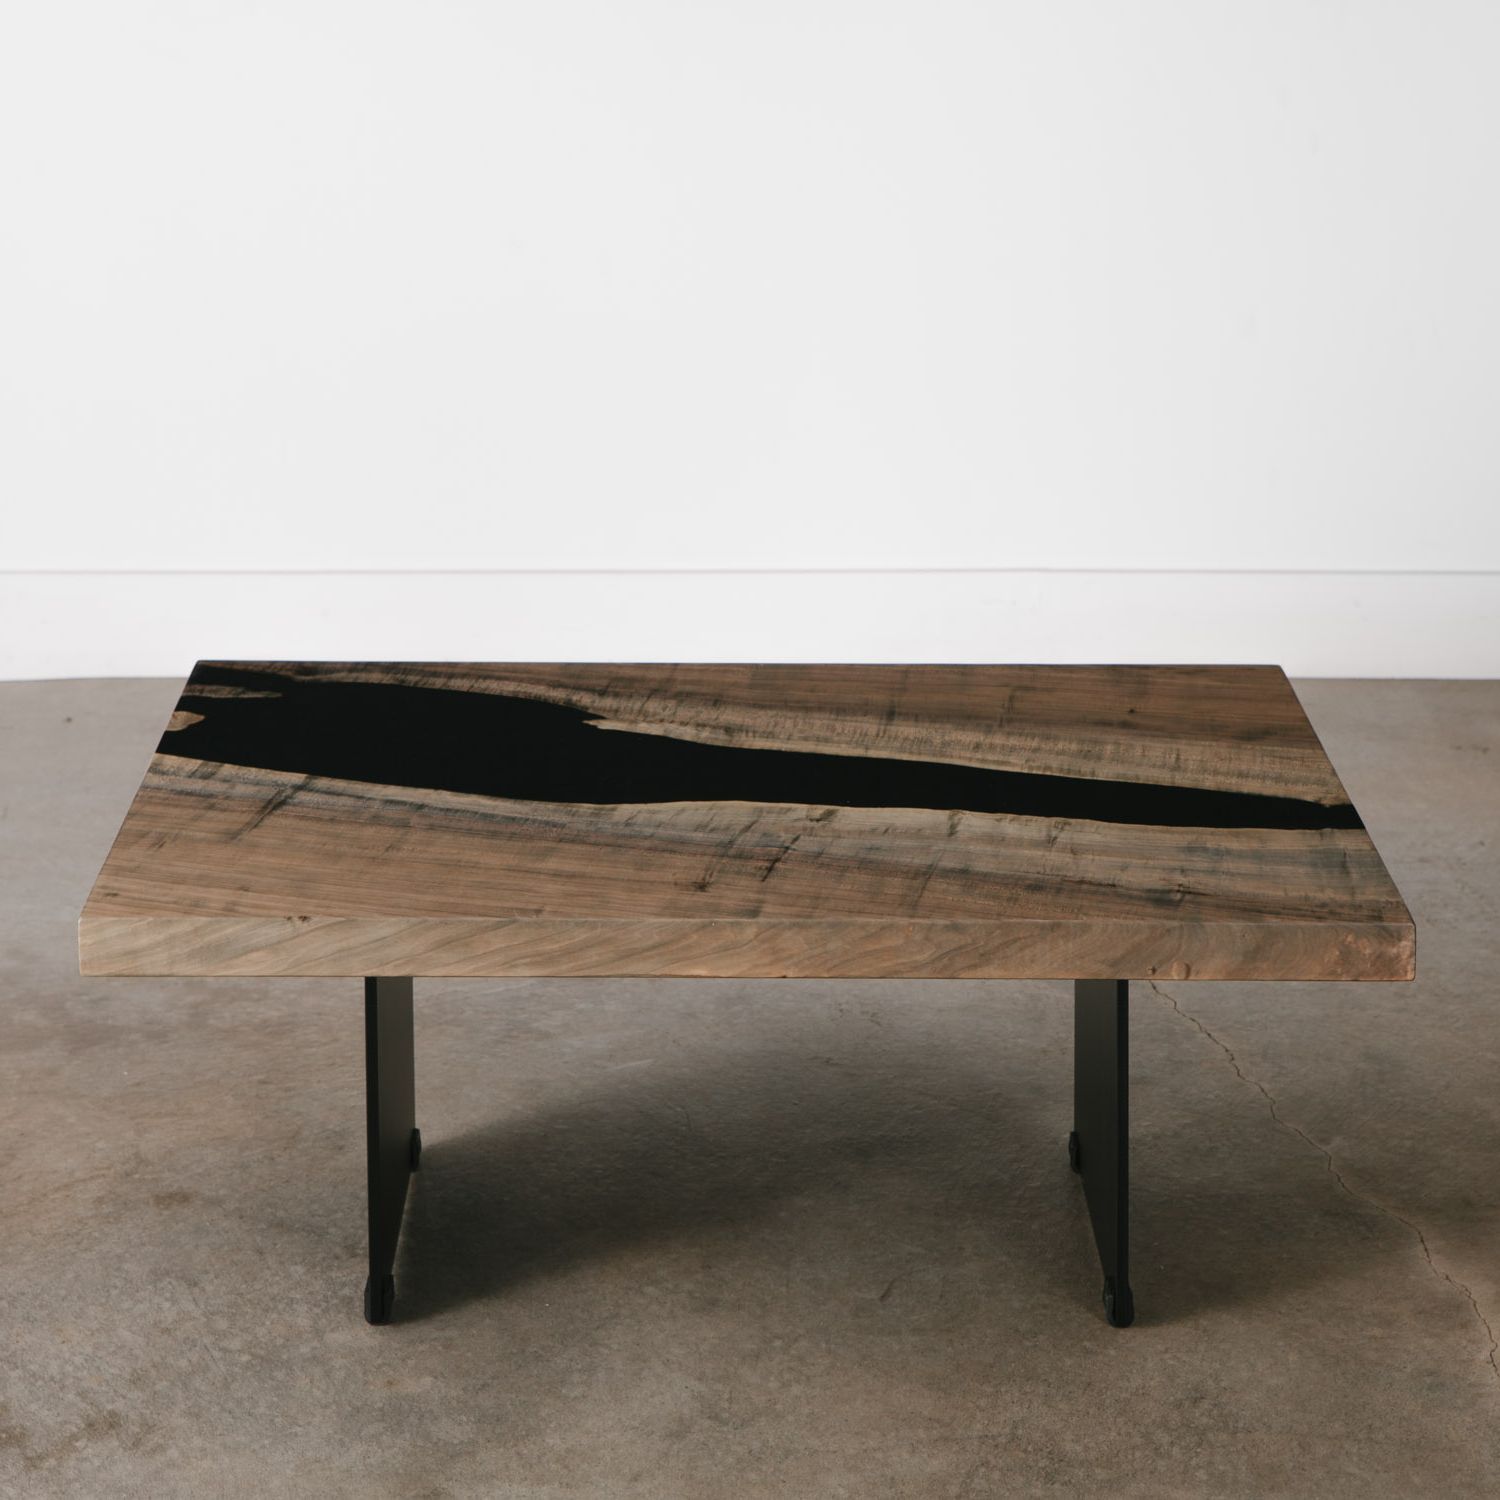 Elko Hardwoods Pertaining To Popular Oxidized Console Tables (View 10 of 10)